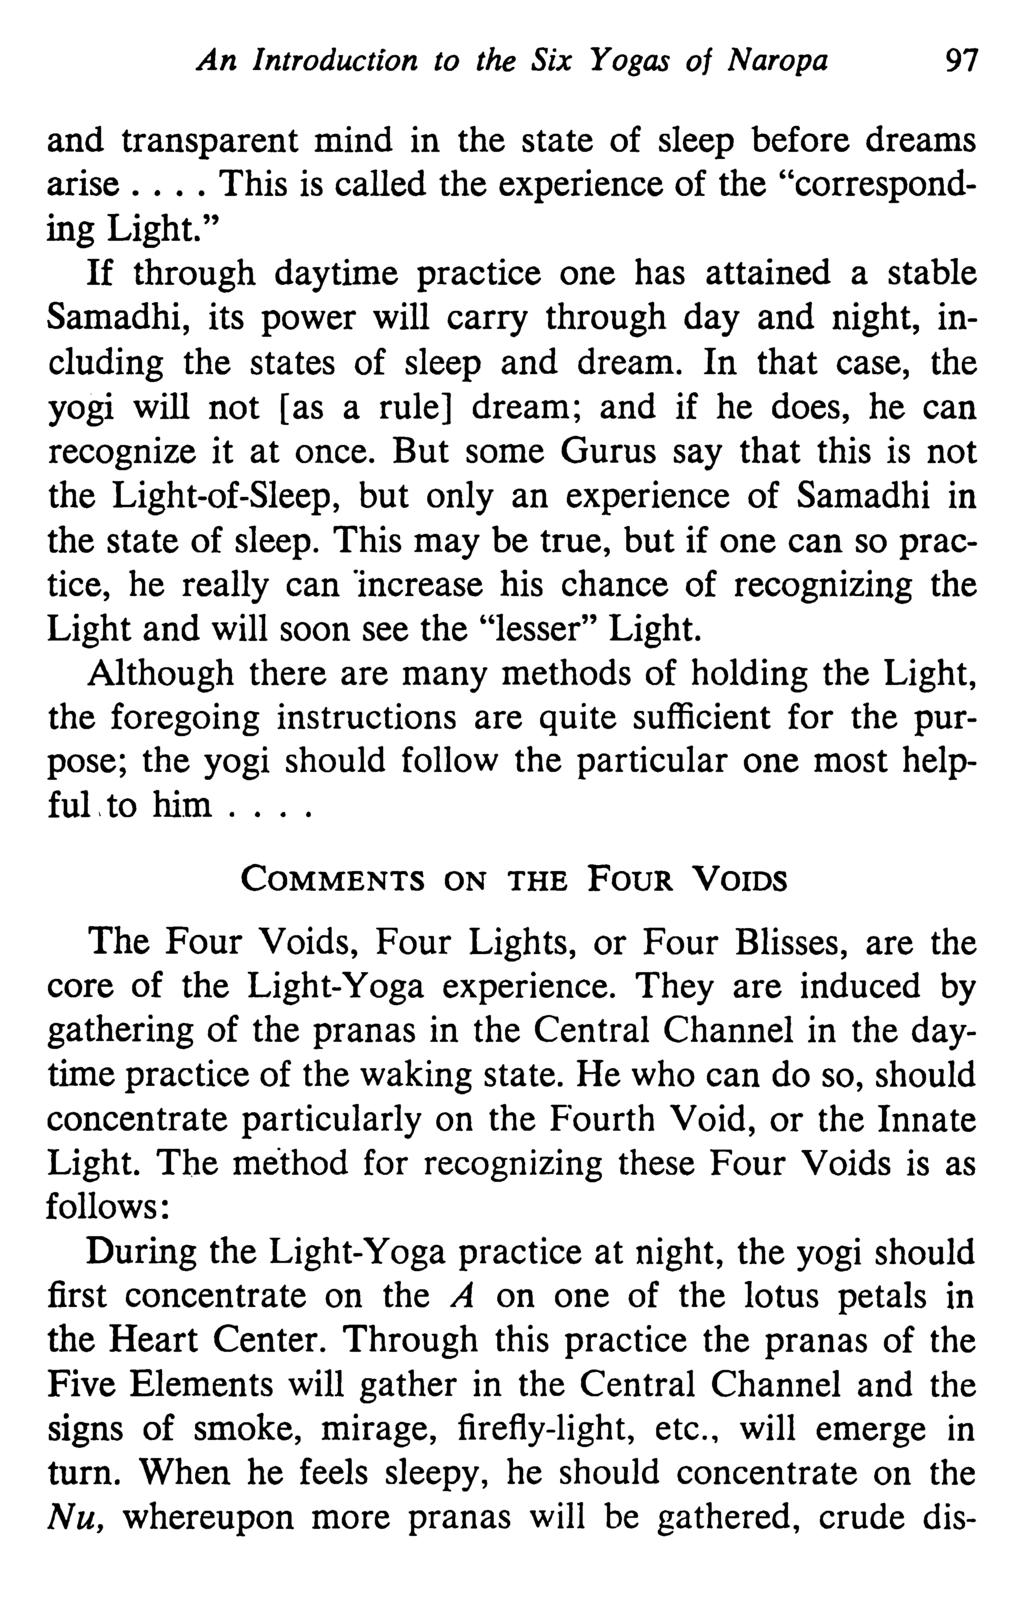 An Introduction to the Six Yogas of Naropa 91 and transparent mind in the state of sleep before dreams arise... This is called the experience of the "corresponding Light.